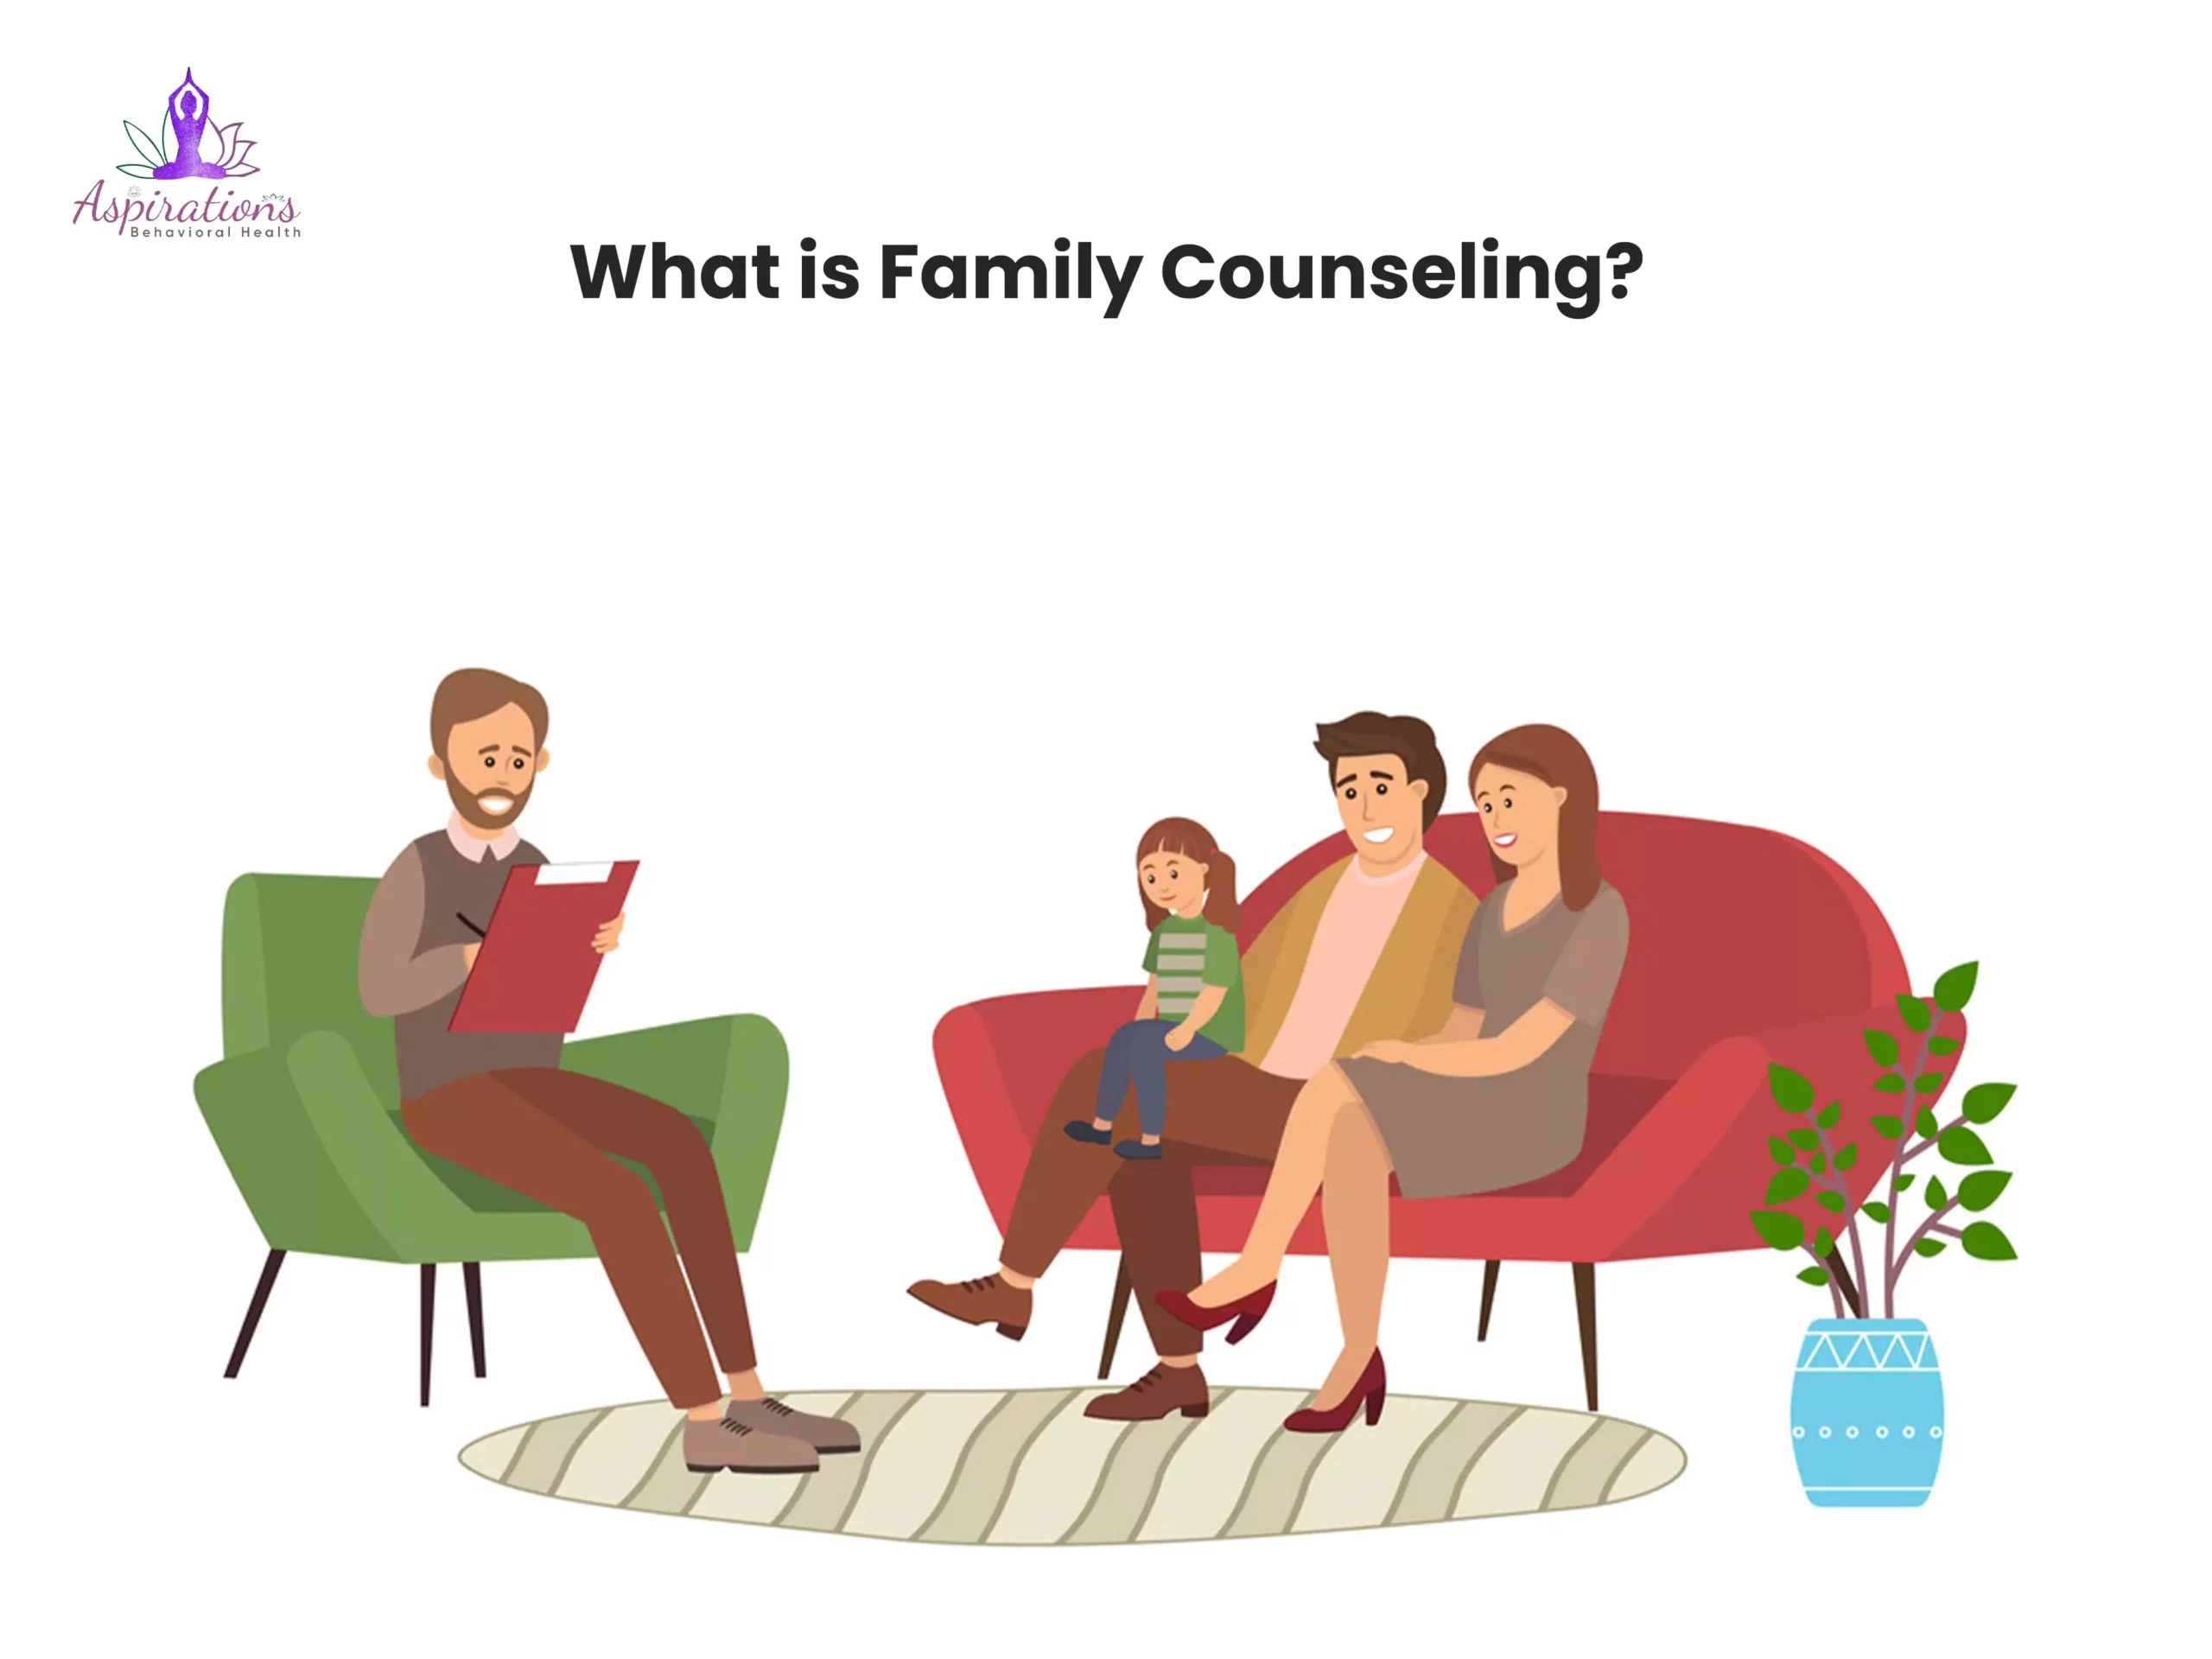 What is Family Counseling?